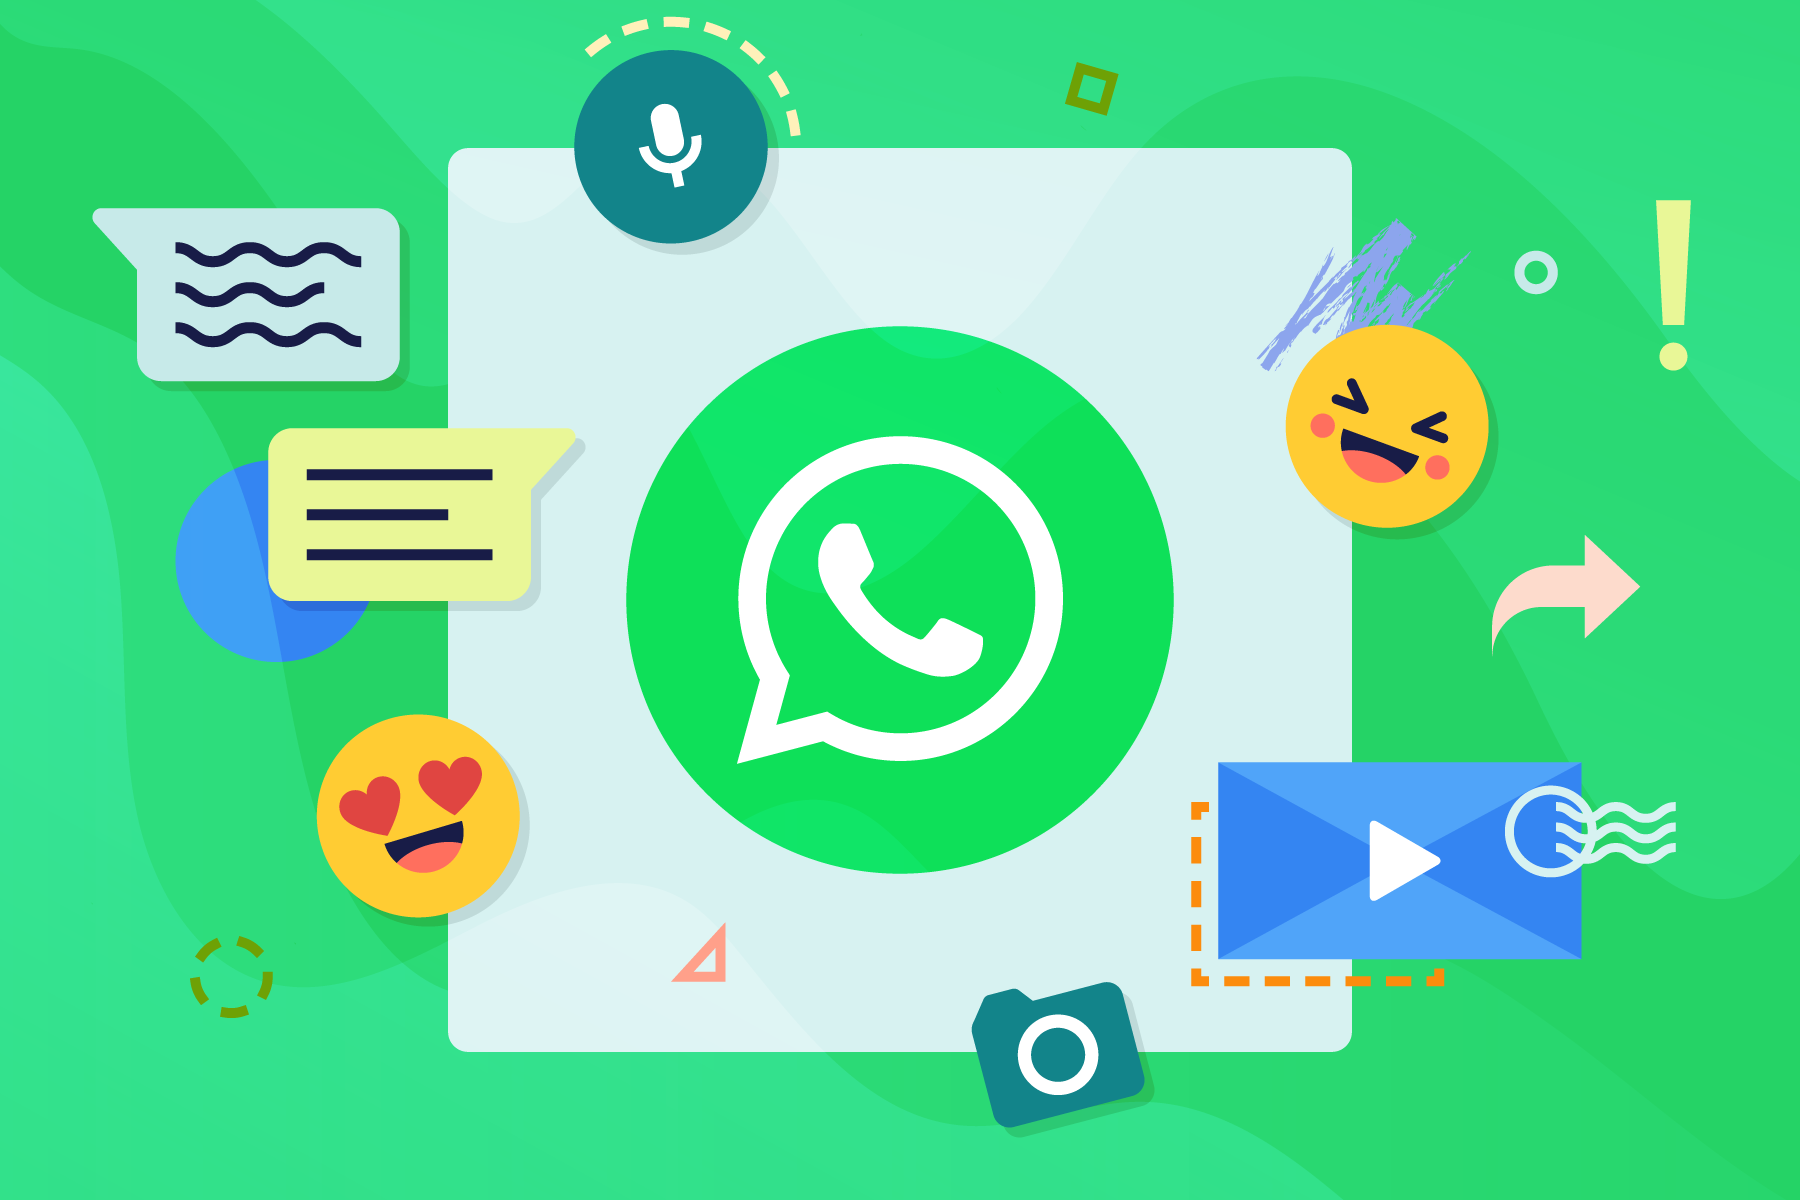 How to Make a Whatsapp Status Video and Share It - Animoto